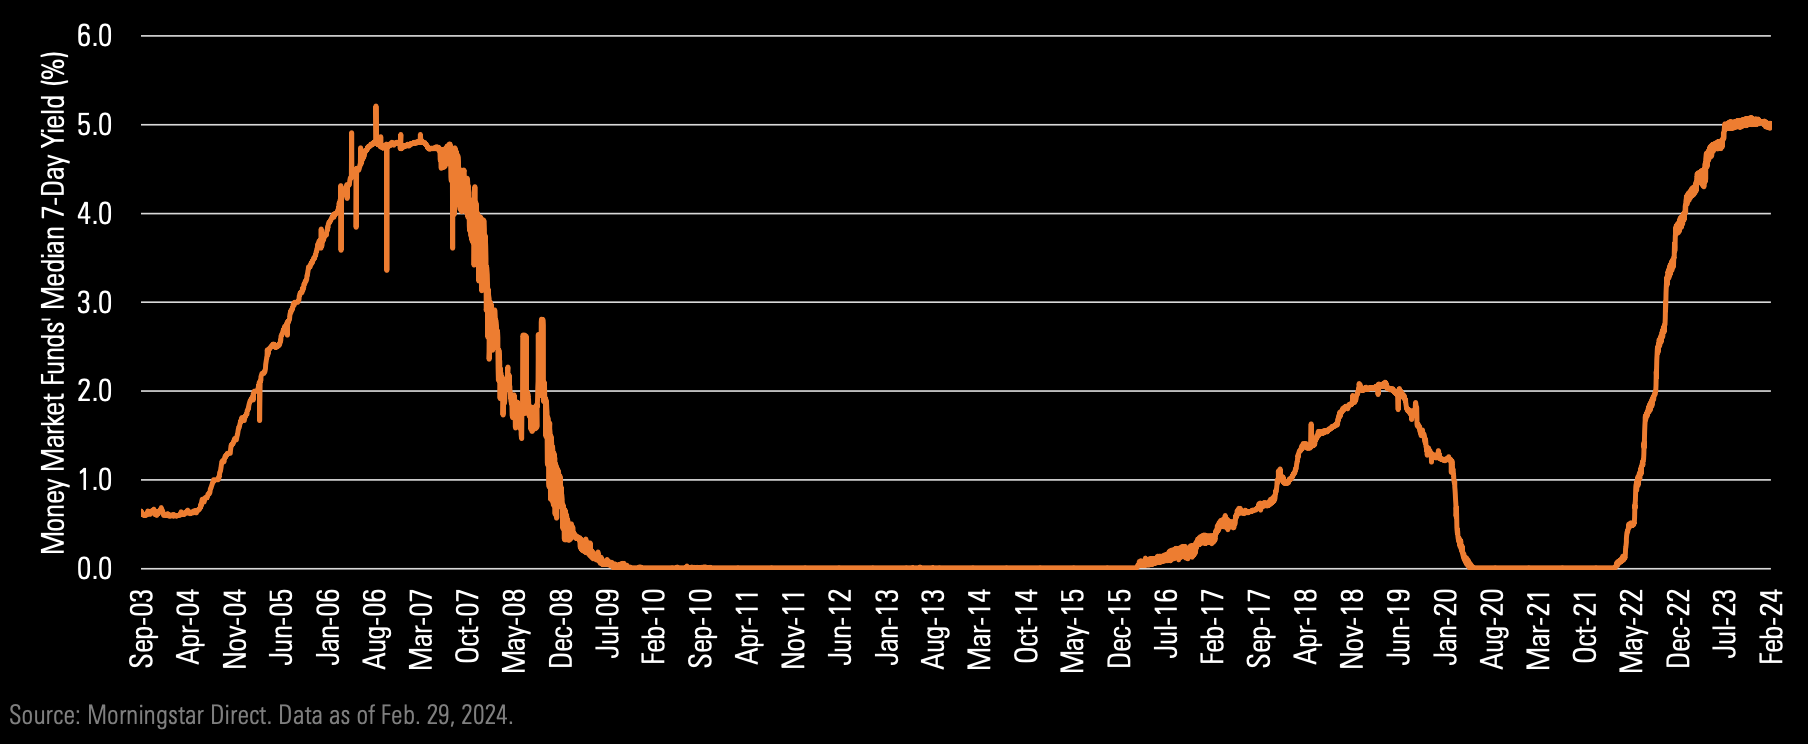 Line graph showing money market funds’ median 7-day yield from September 20023 to February 2024.